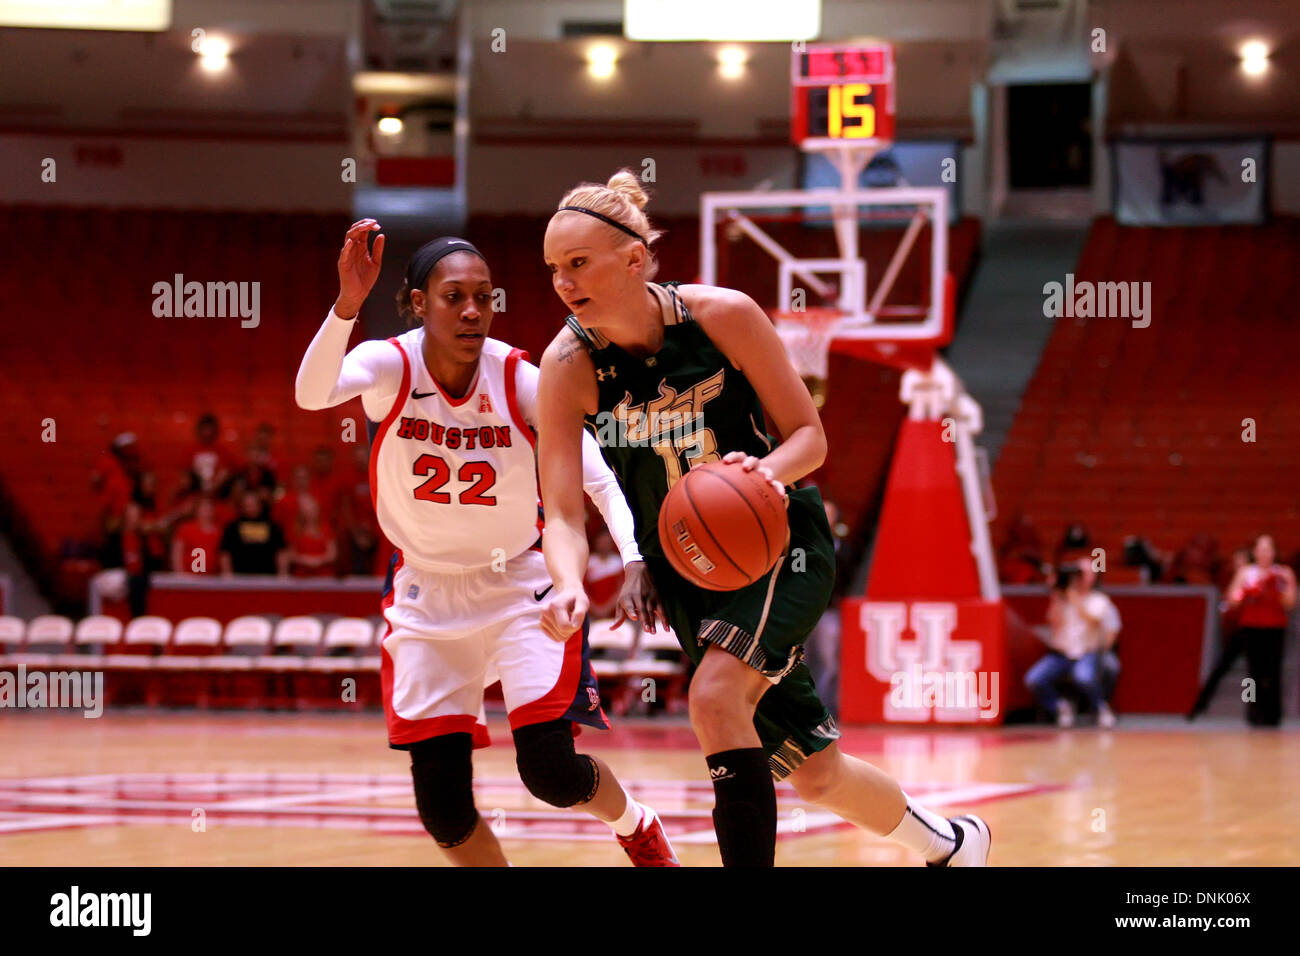 Houston, Texas, USA. 31st Dec, 2013. DEC 31 2013: University of South Florida guard Inga Orekhova #13 drives to the basket while being defended by University of Houston forward Marche' Amerson #22 during the NCAA Women's basketball game between Houston and South Florida from Hofheinz Pavilion in Houston, TX. © csm/Alamy Live News Stock Photo